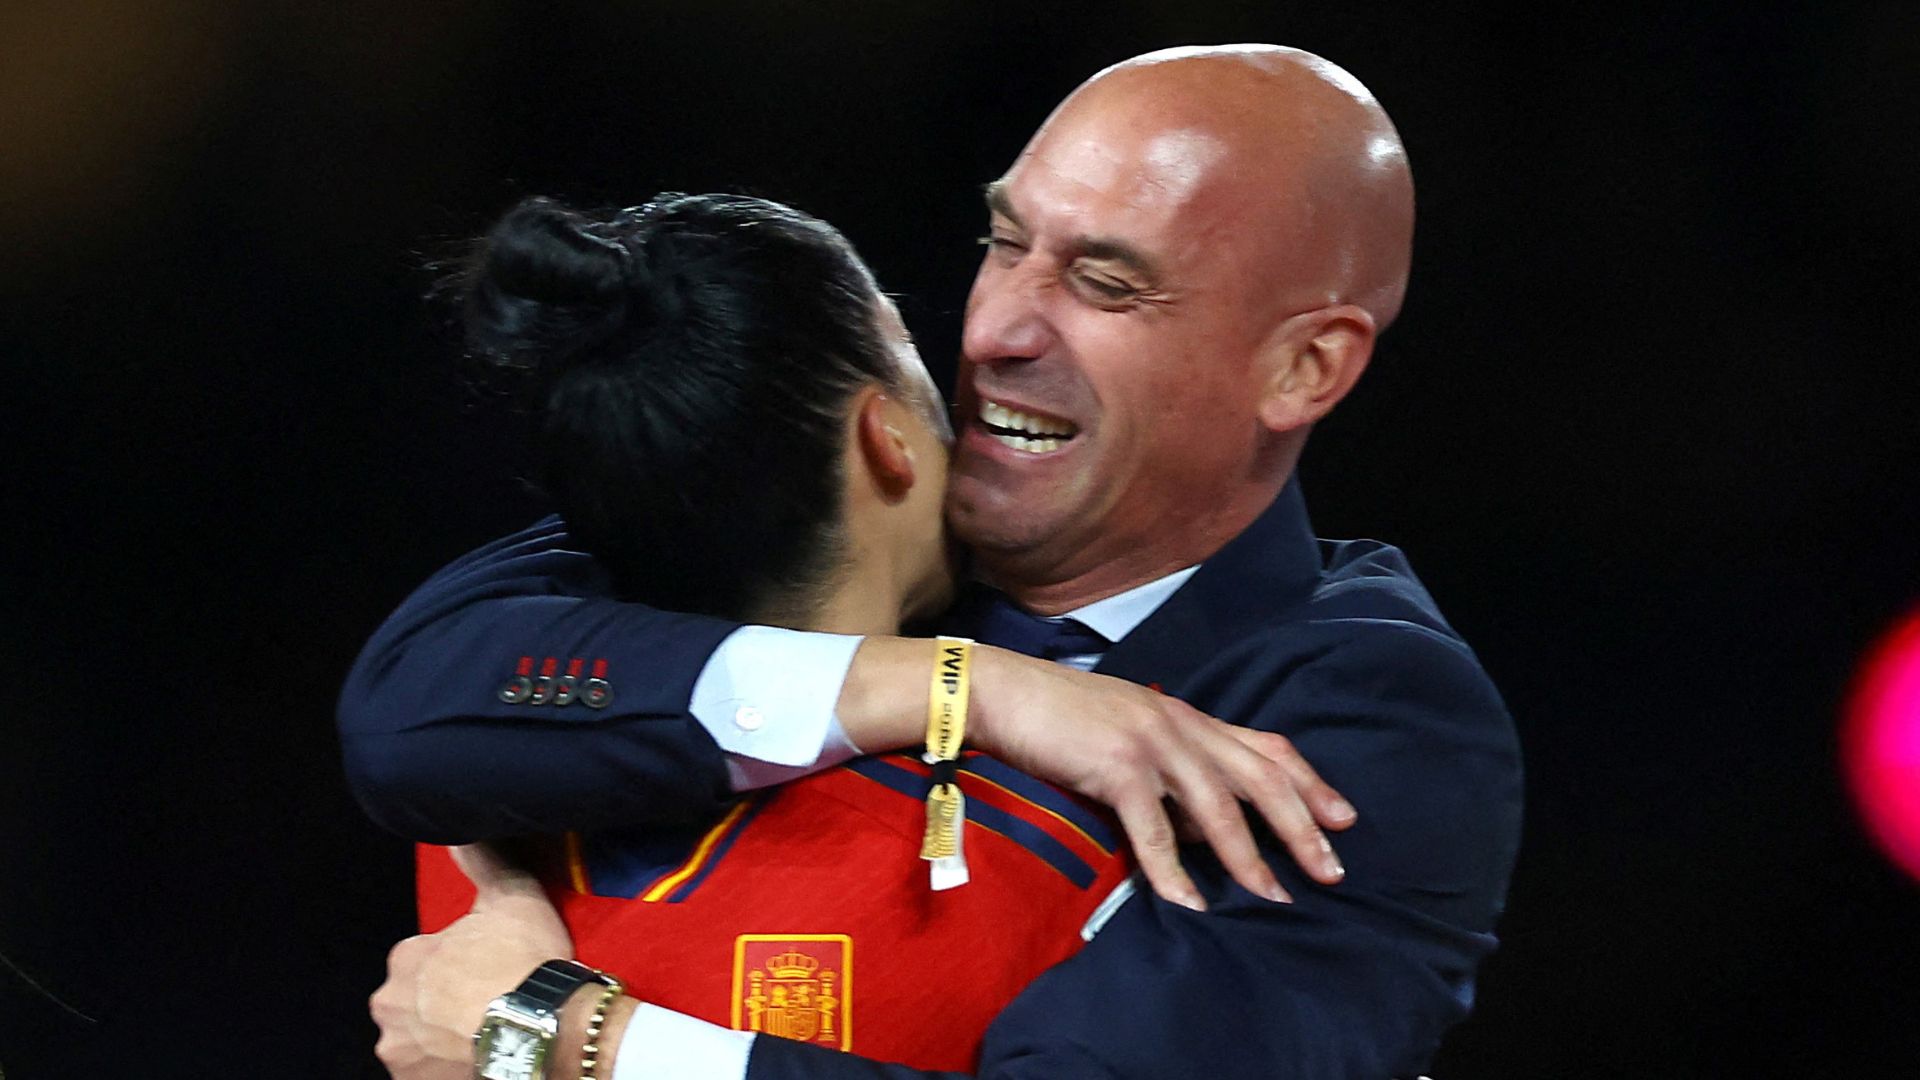 Rubiales hugs Hermoso moments before the kiss that has plunged Spanish football into crisis. /Hannah Mckay/Reuters 
